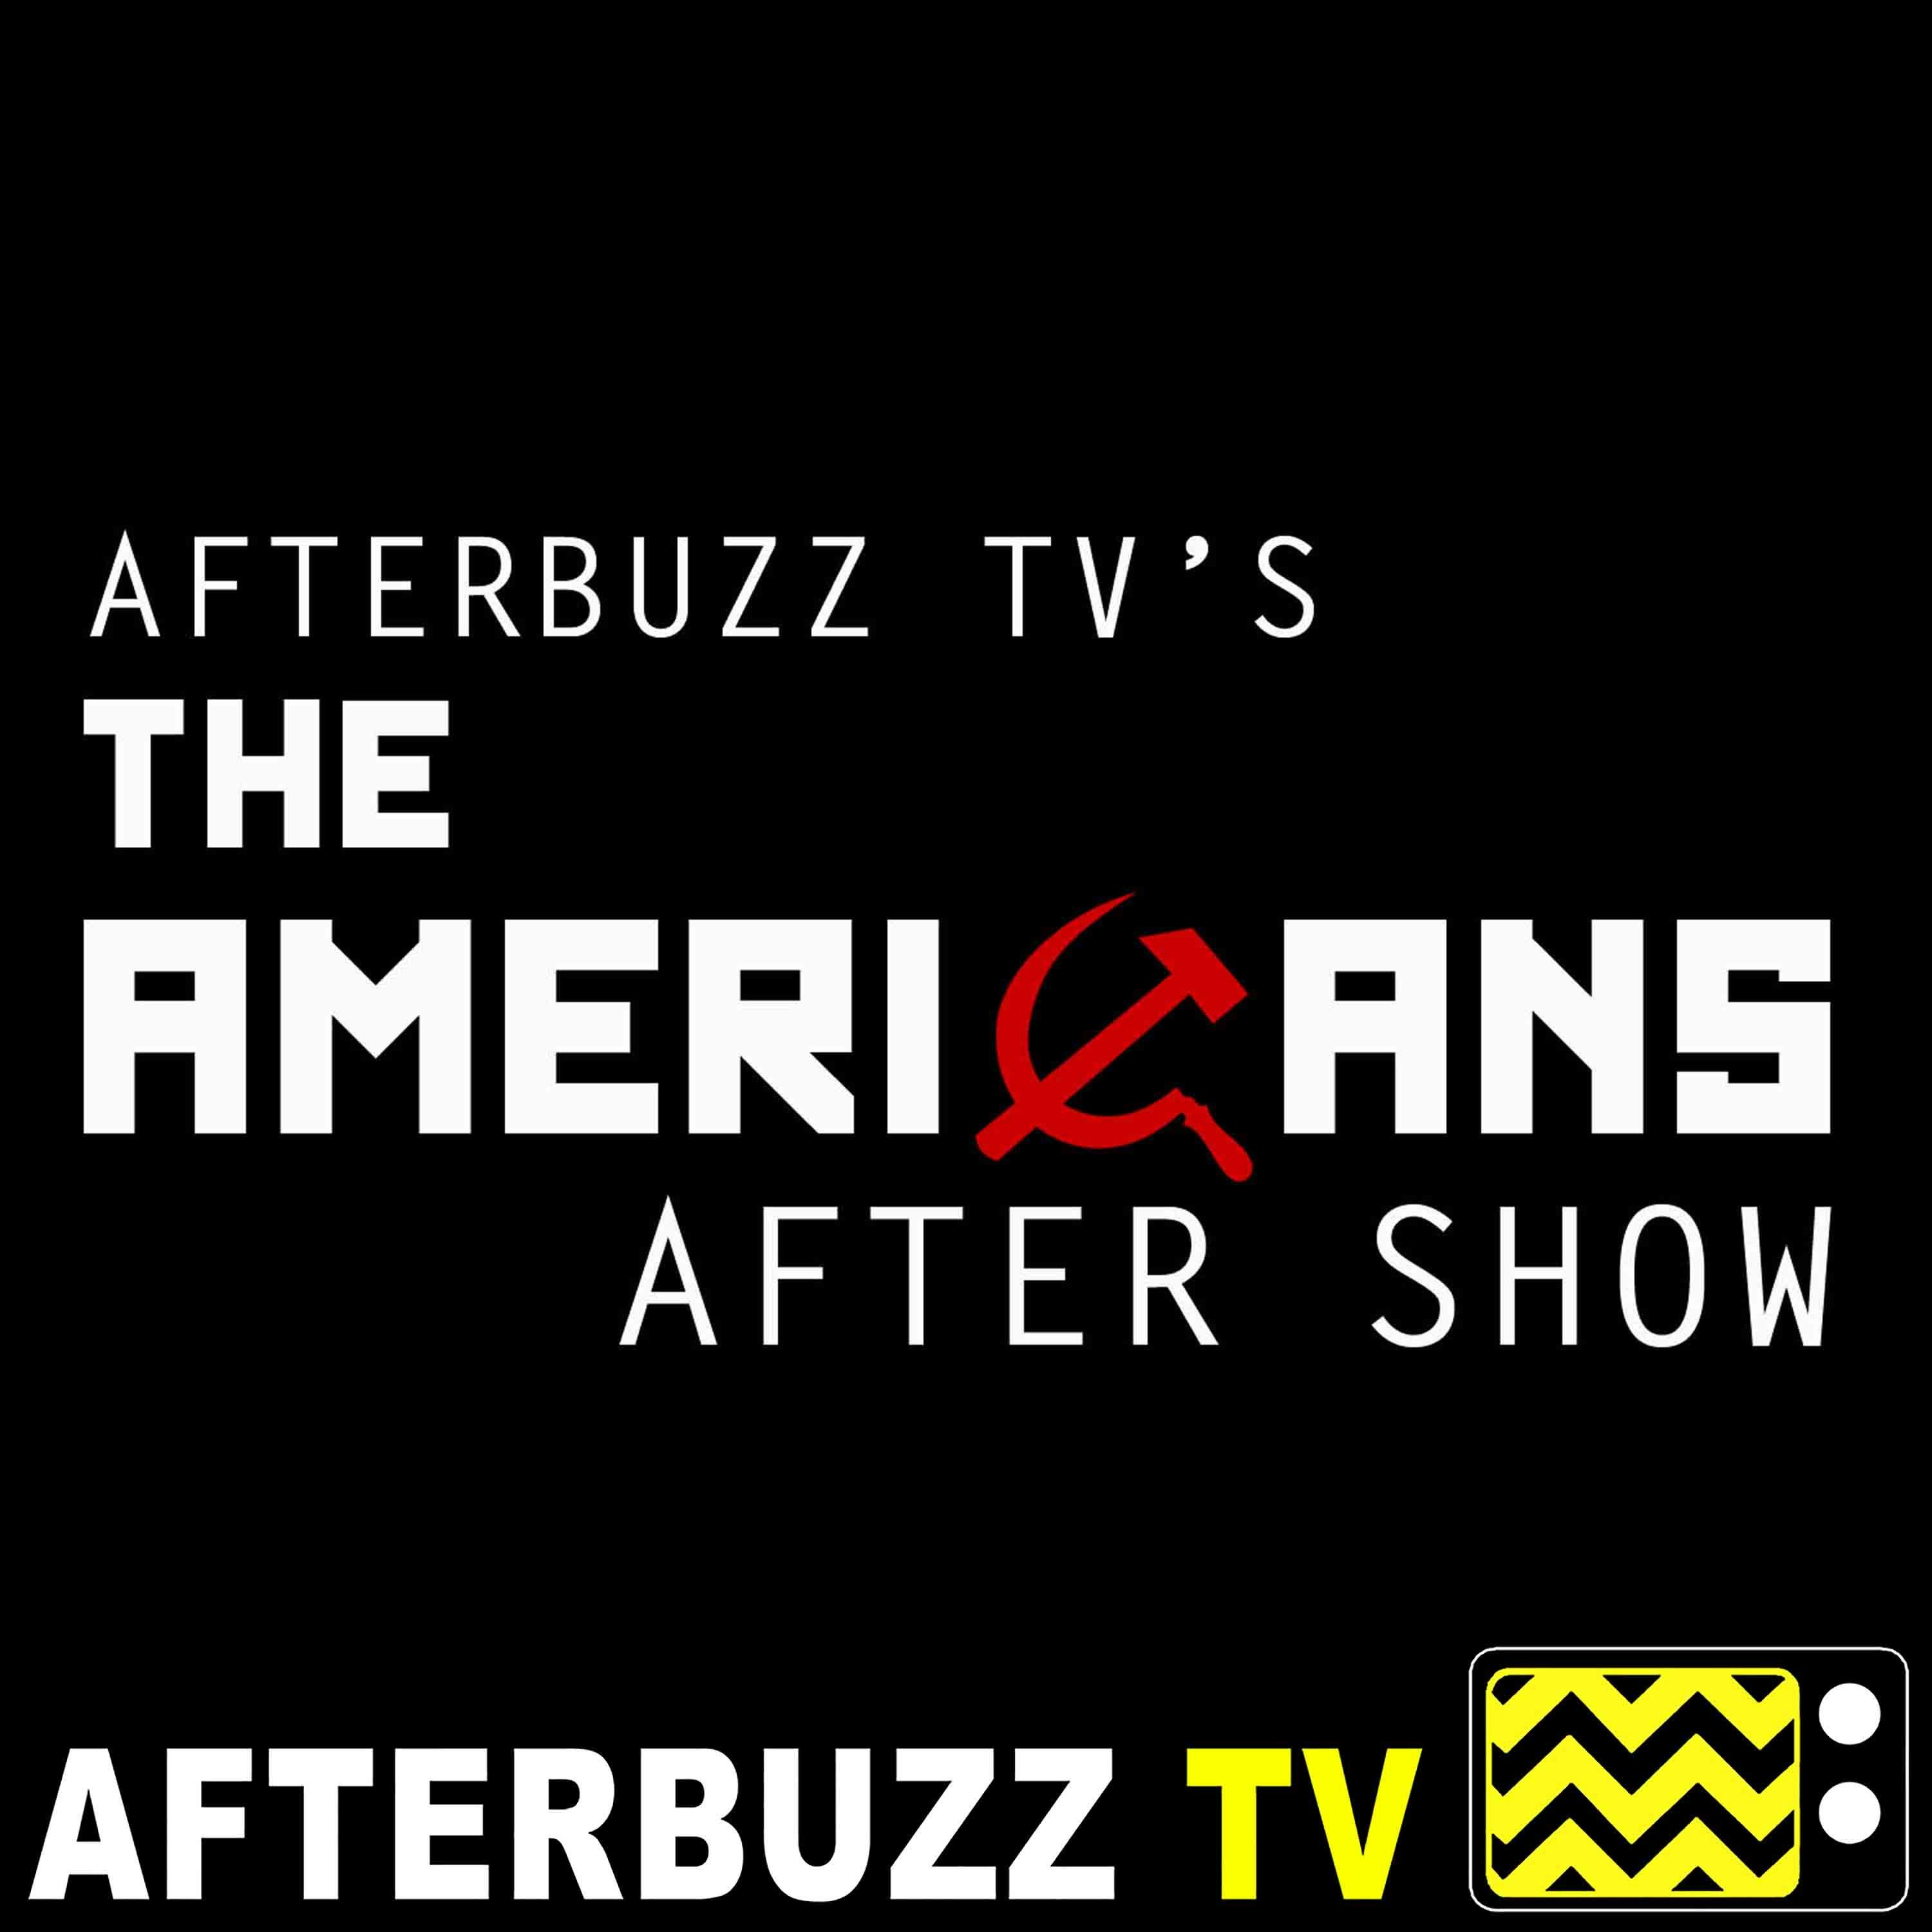 The Americans S:6 | The Summit; Jennings, Elizabeth E:8 & E:9 | AfterBuzz TV AfterShow